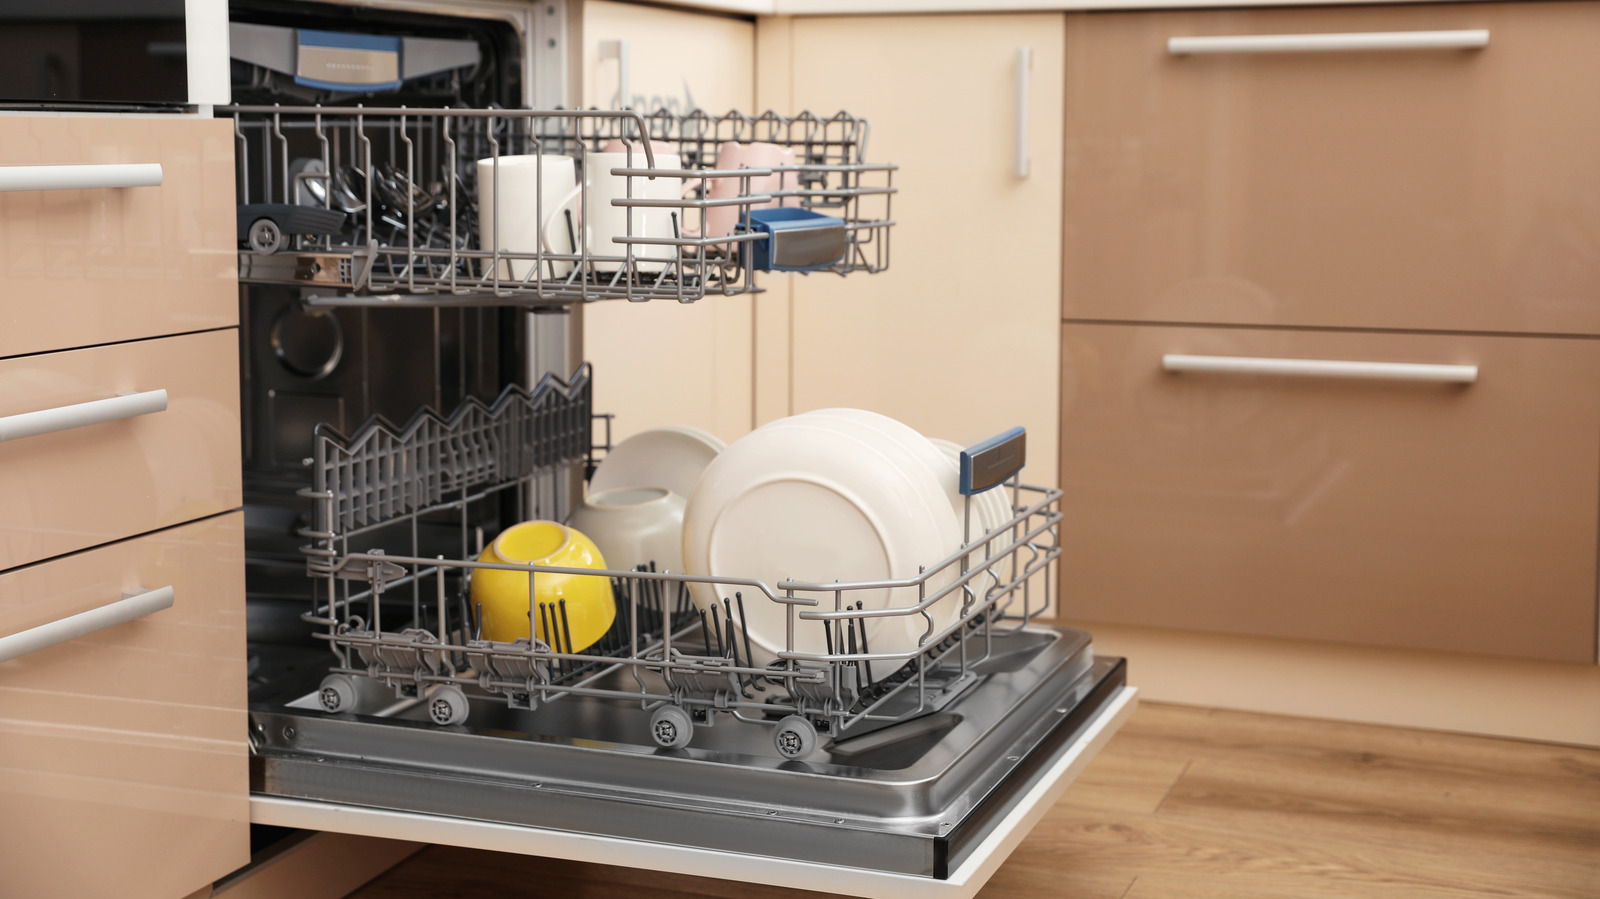 https://www.housedigest.com/img/gallery/heres-how-often-you-need-to-clean-your-dishwasher/l-intro-1645732913.jpg